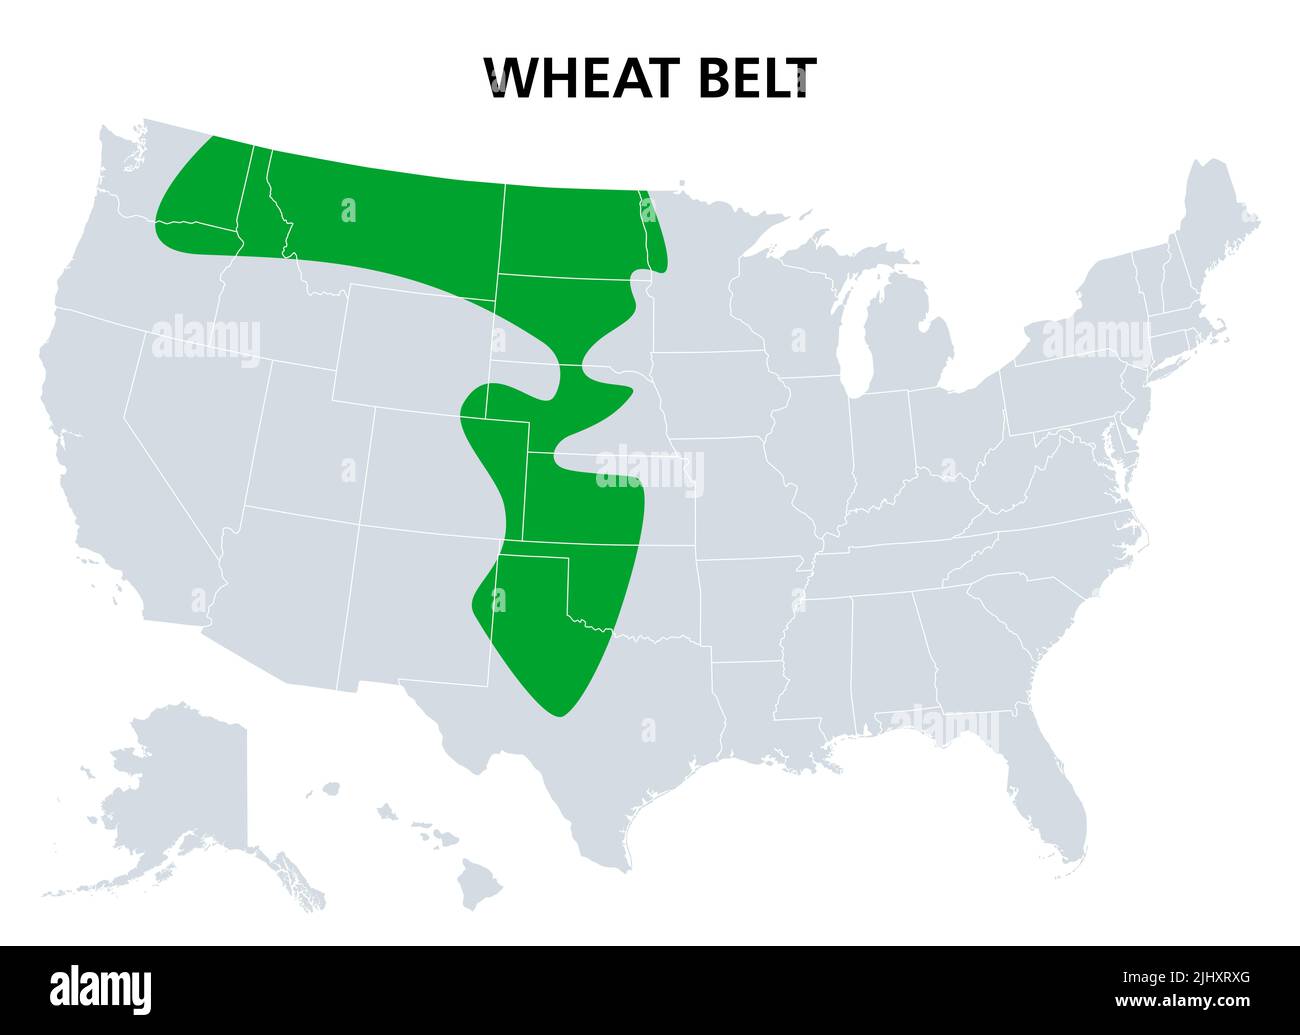 Wheat Belt of the United States, political map. Part of the North American Great Plains where wheat is the dominant crop. Stock Photo